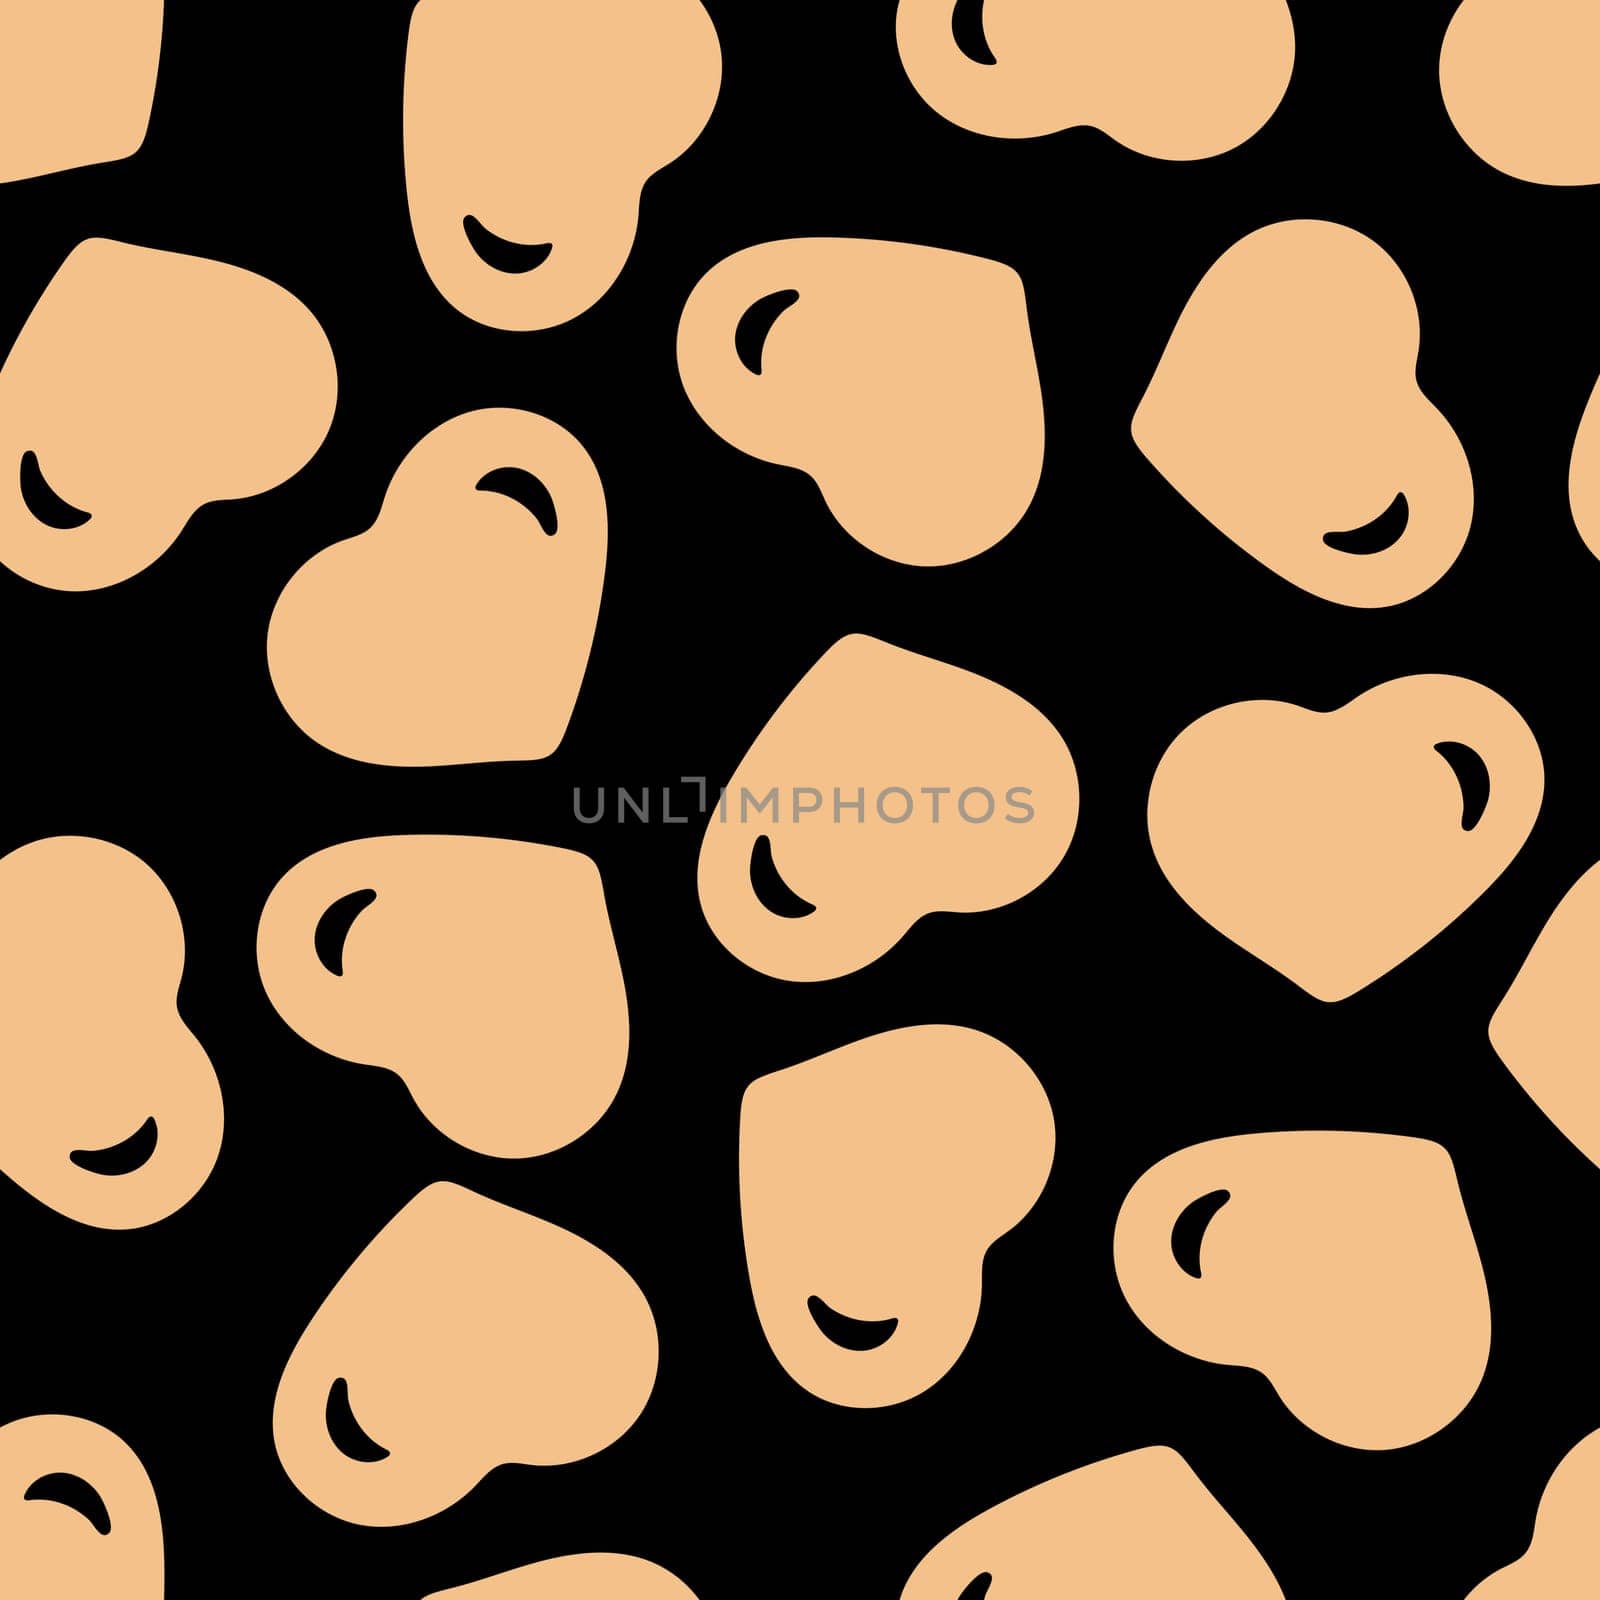 Hand Drawn Seamless Patterns with Hearts in Doodle Style. Romantic Love Digital Paper for Valentines Day. Colorful Hearts on Black Background.